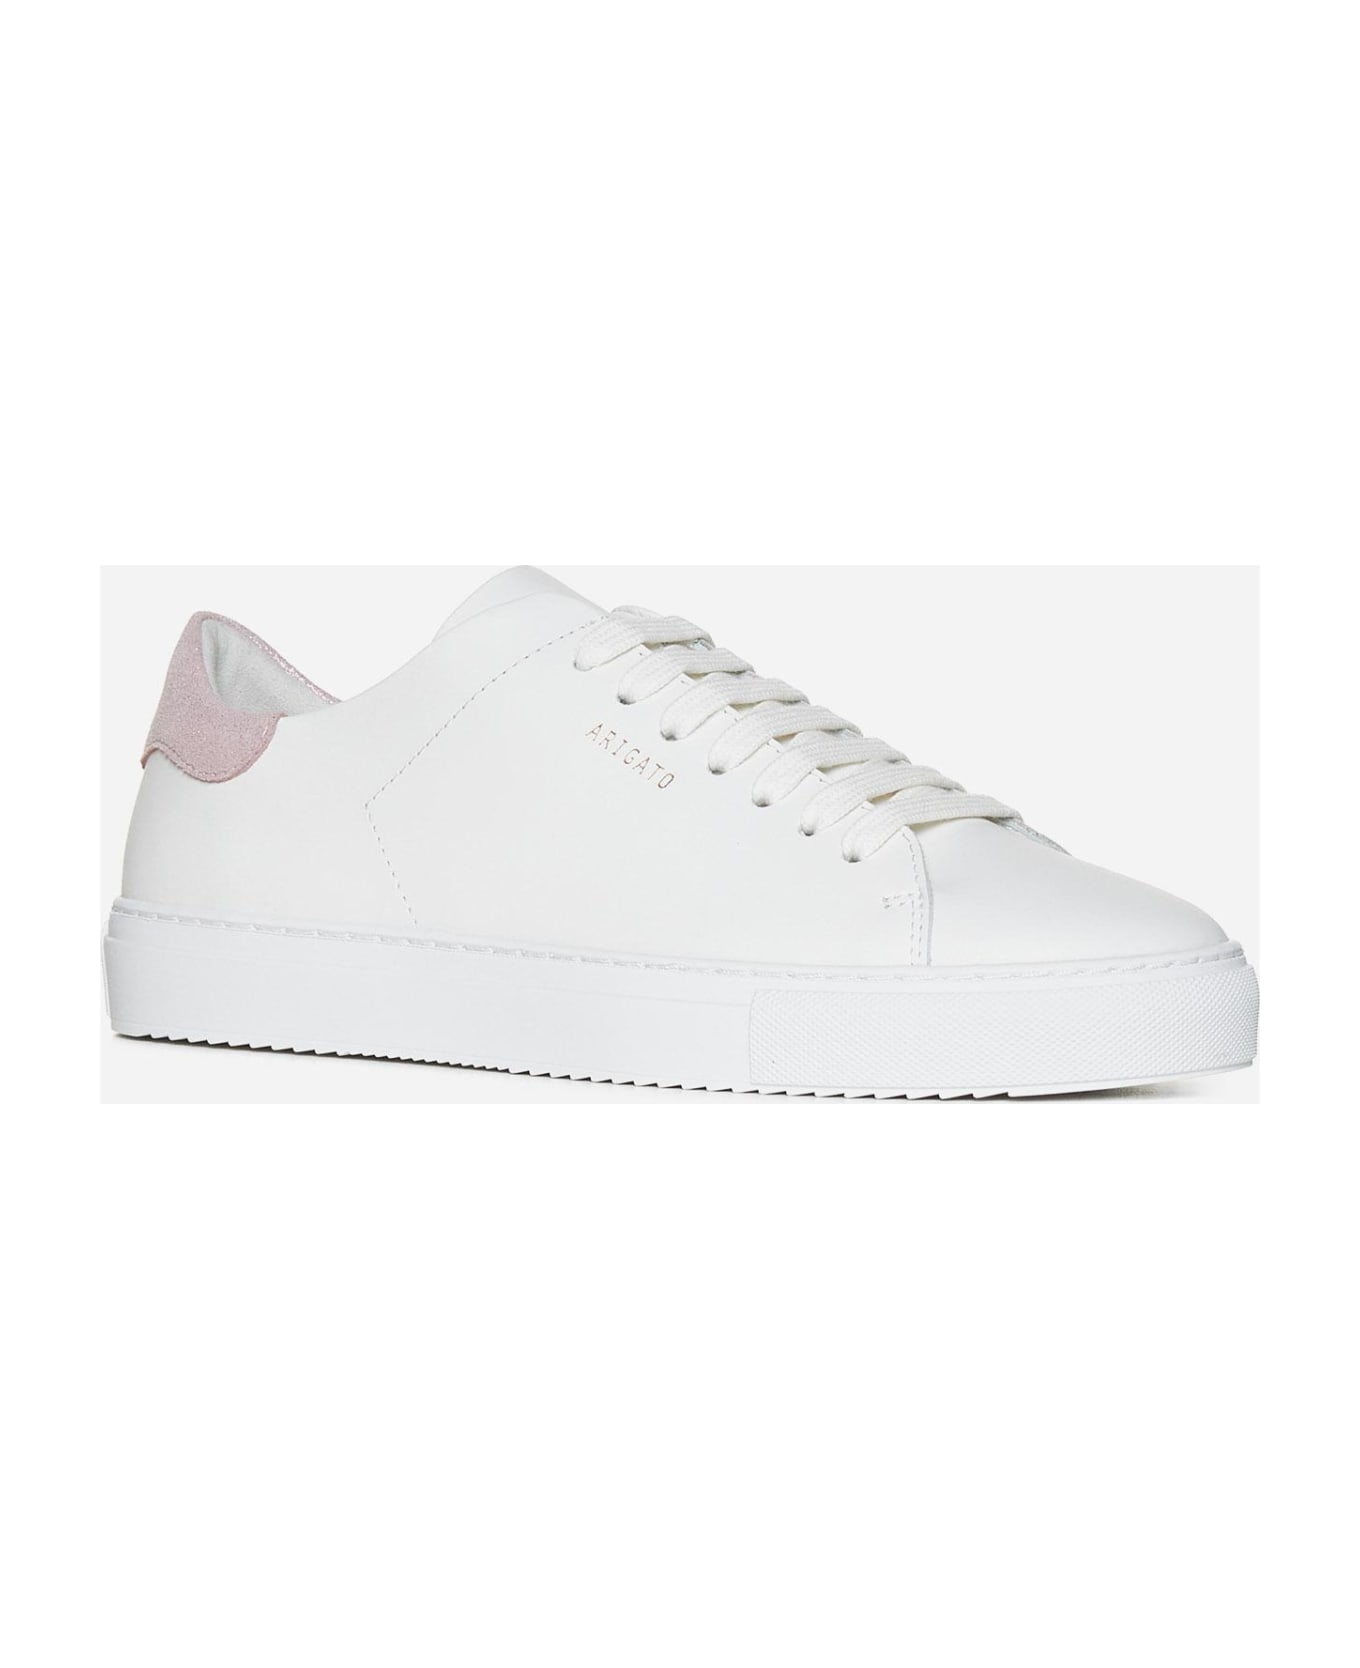 Axel Arigato Clean 90 Leather Sneakers - White Pink